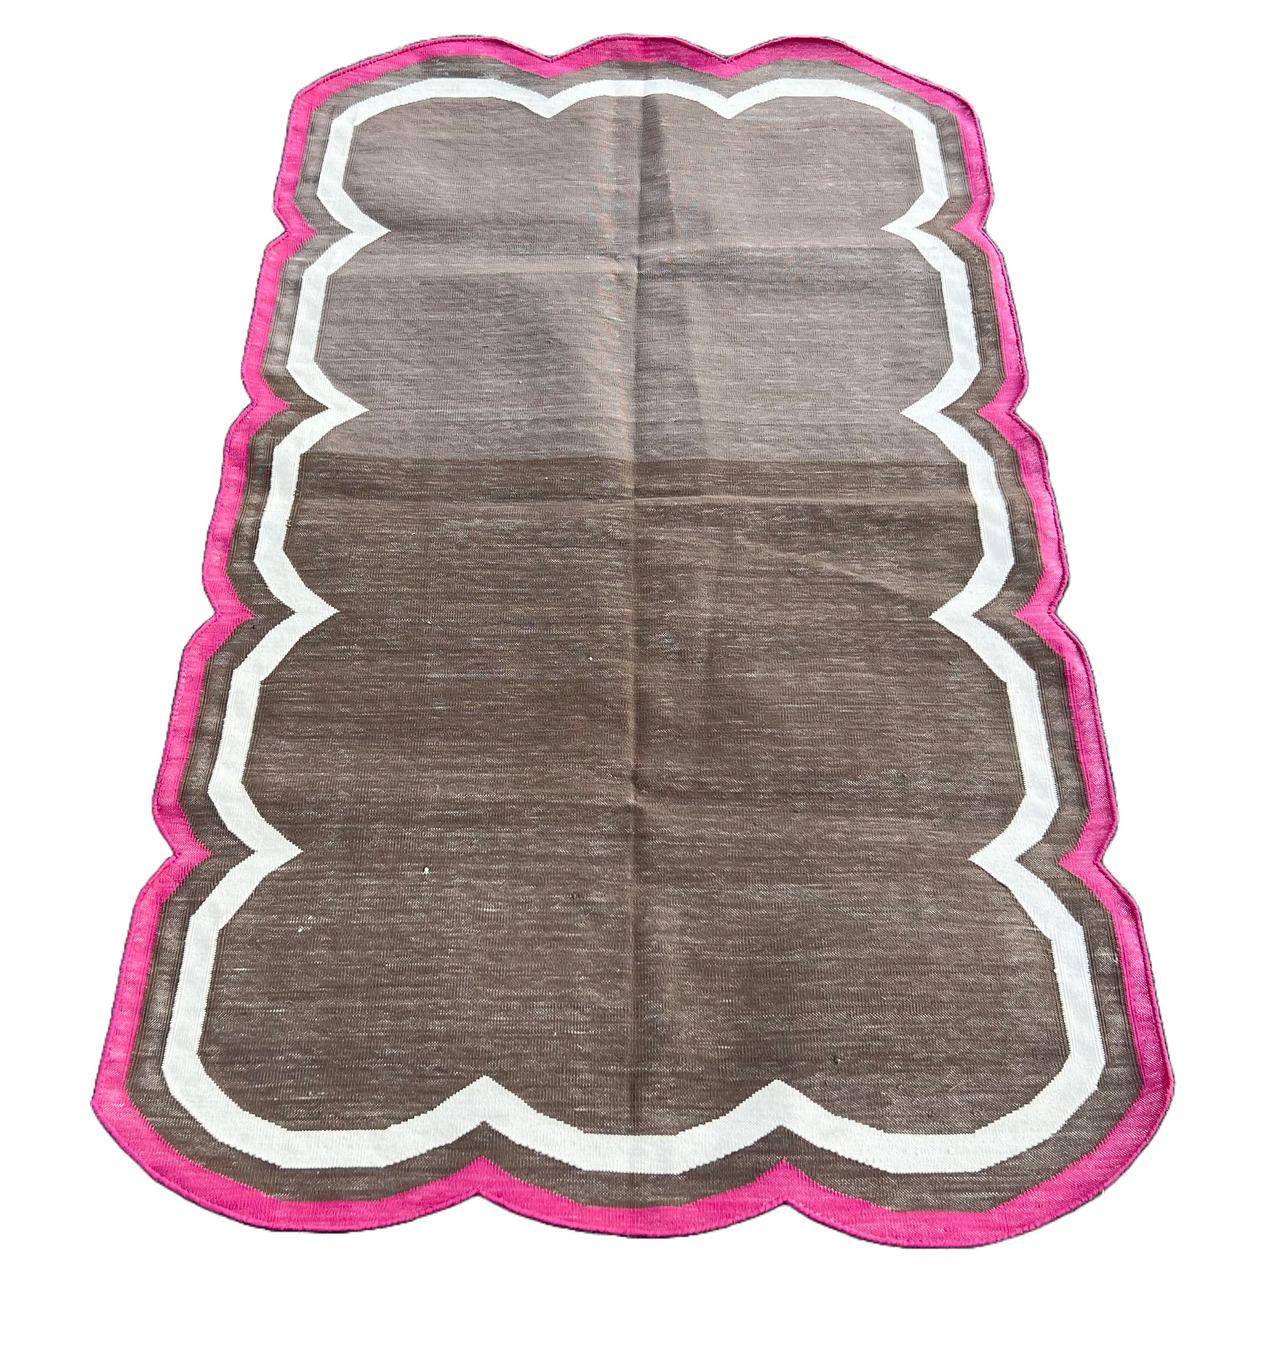 Hand-Woven Handmade Cotton Area Flat Weave Rug, 3x5 Brown And Pink Scalloped Kilim Dhurrie For Sale